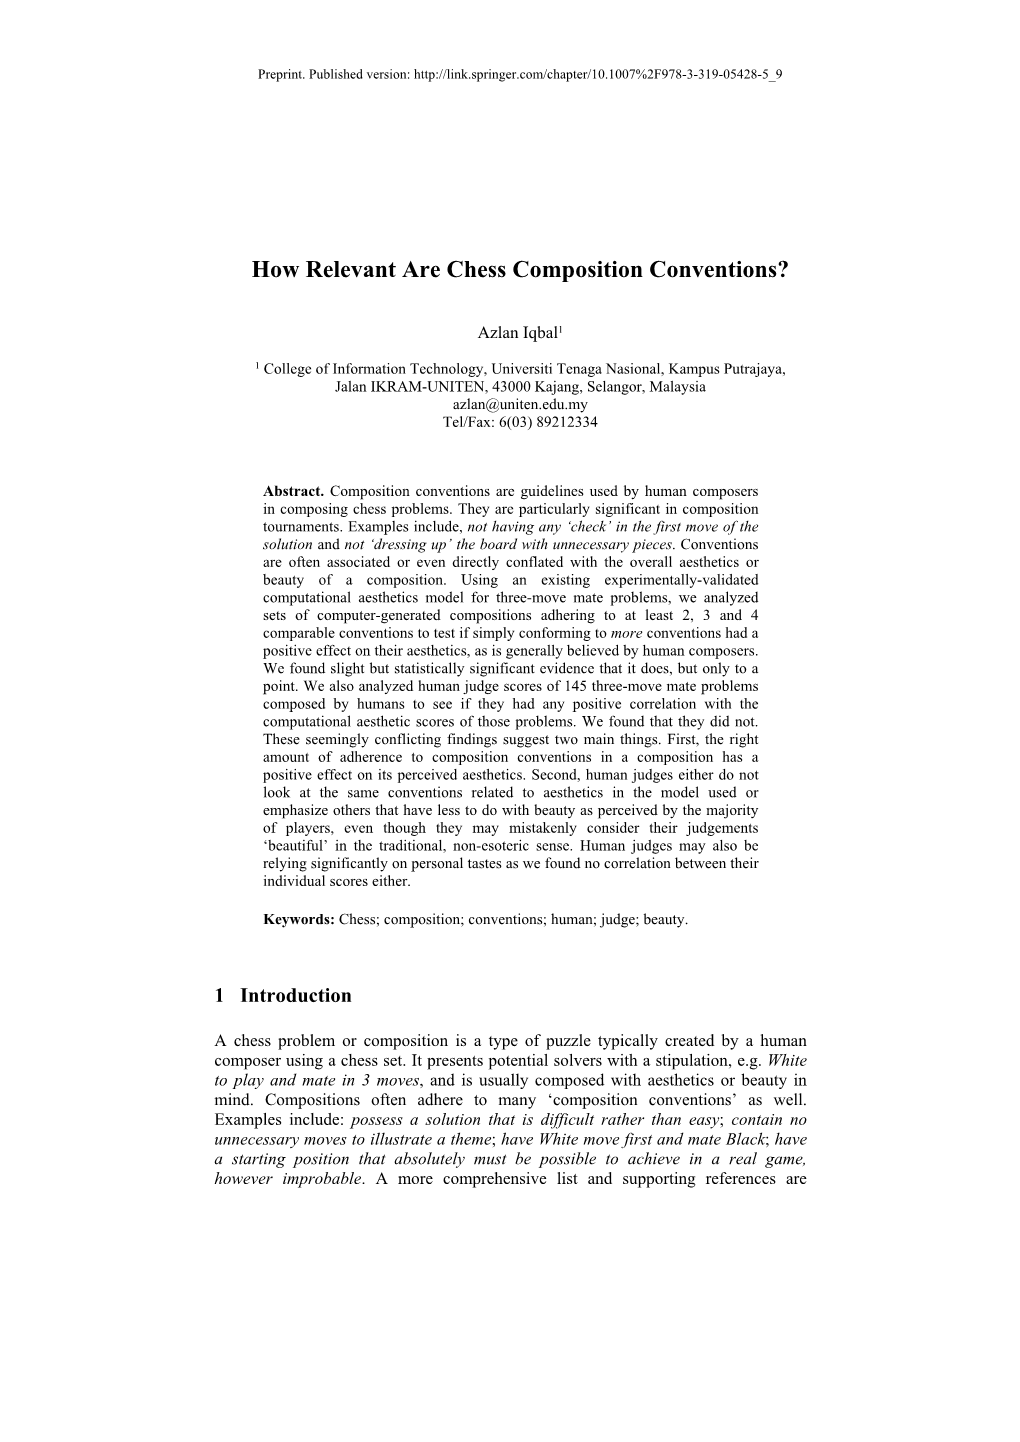 How Relevant Are Chess Composition Conventions?